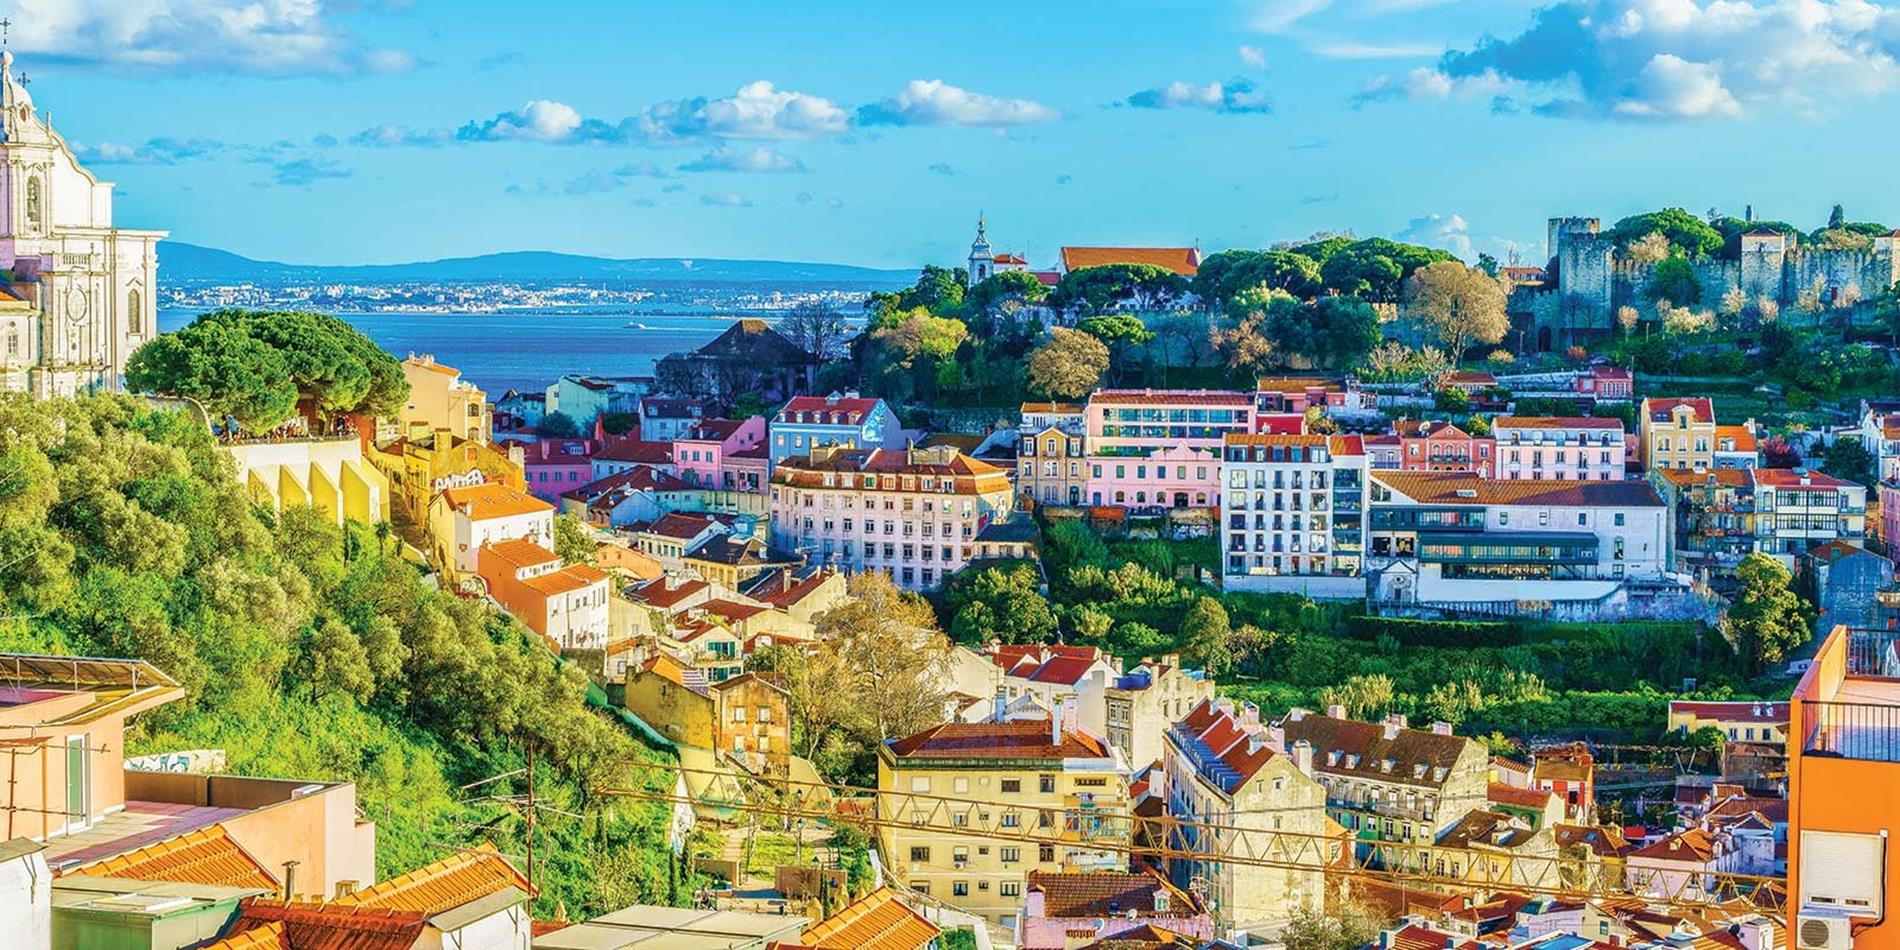 Aerial view of sun drenched city, Lisbon